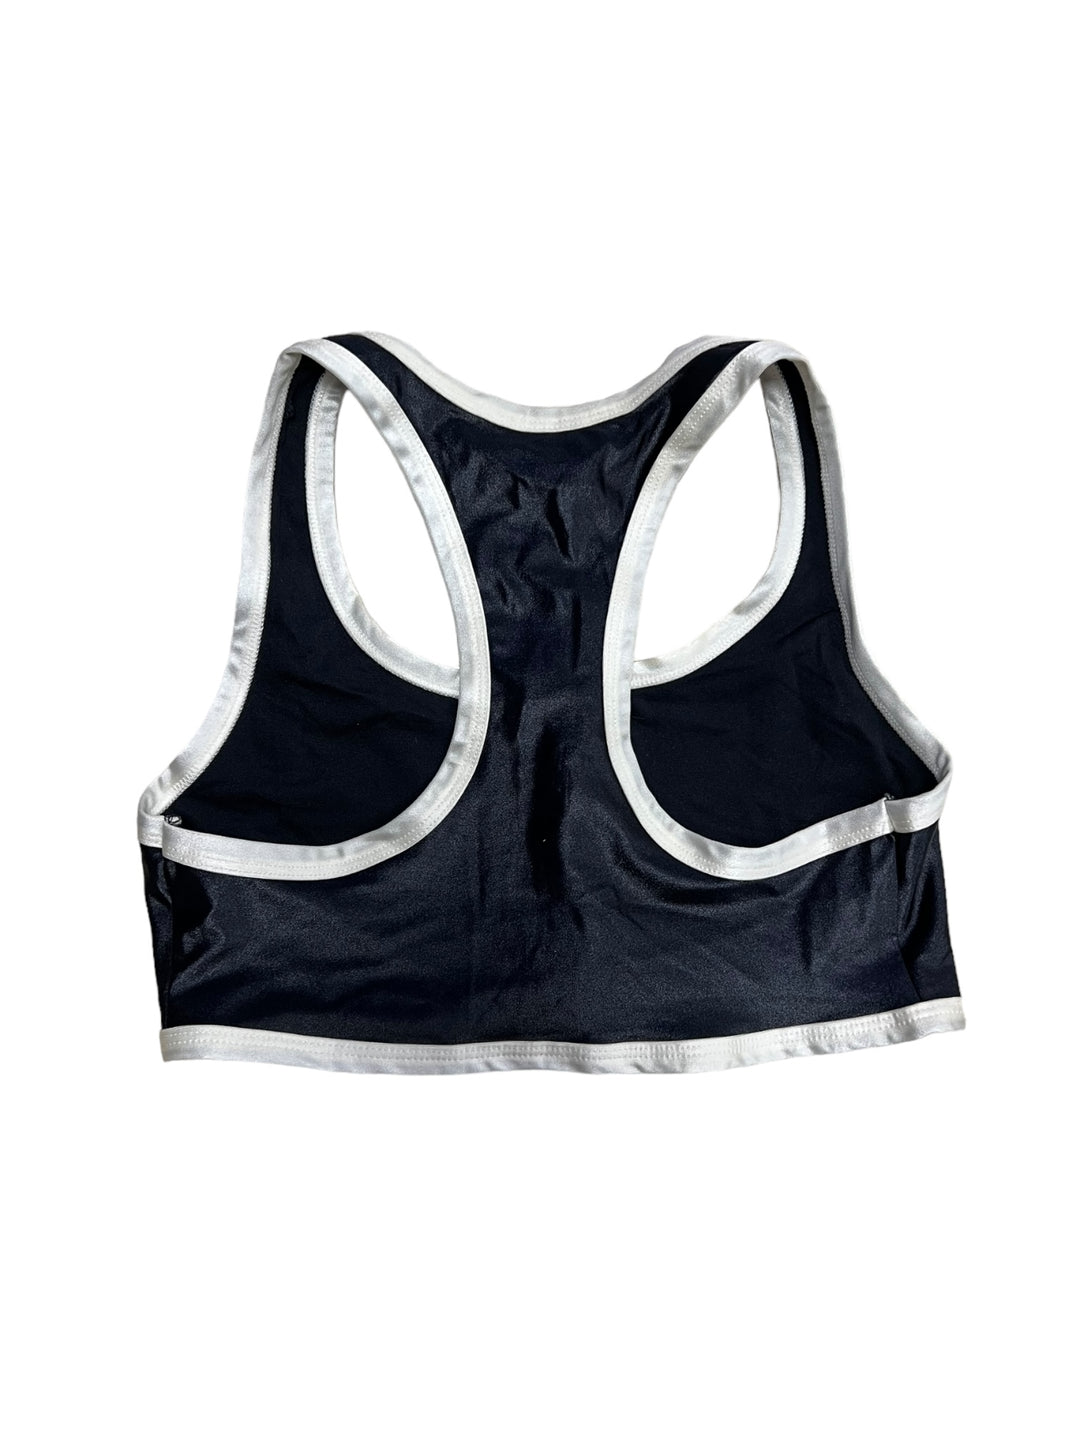 Guess Activewear Deadstock top women’s small